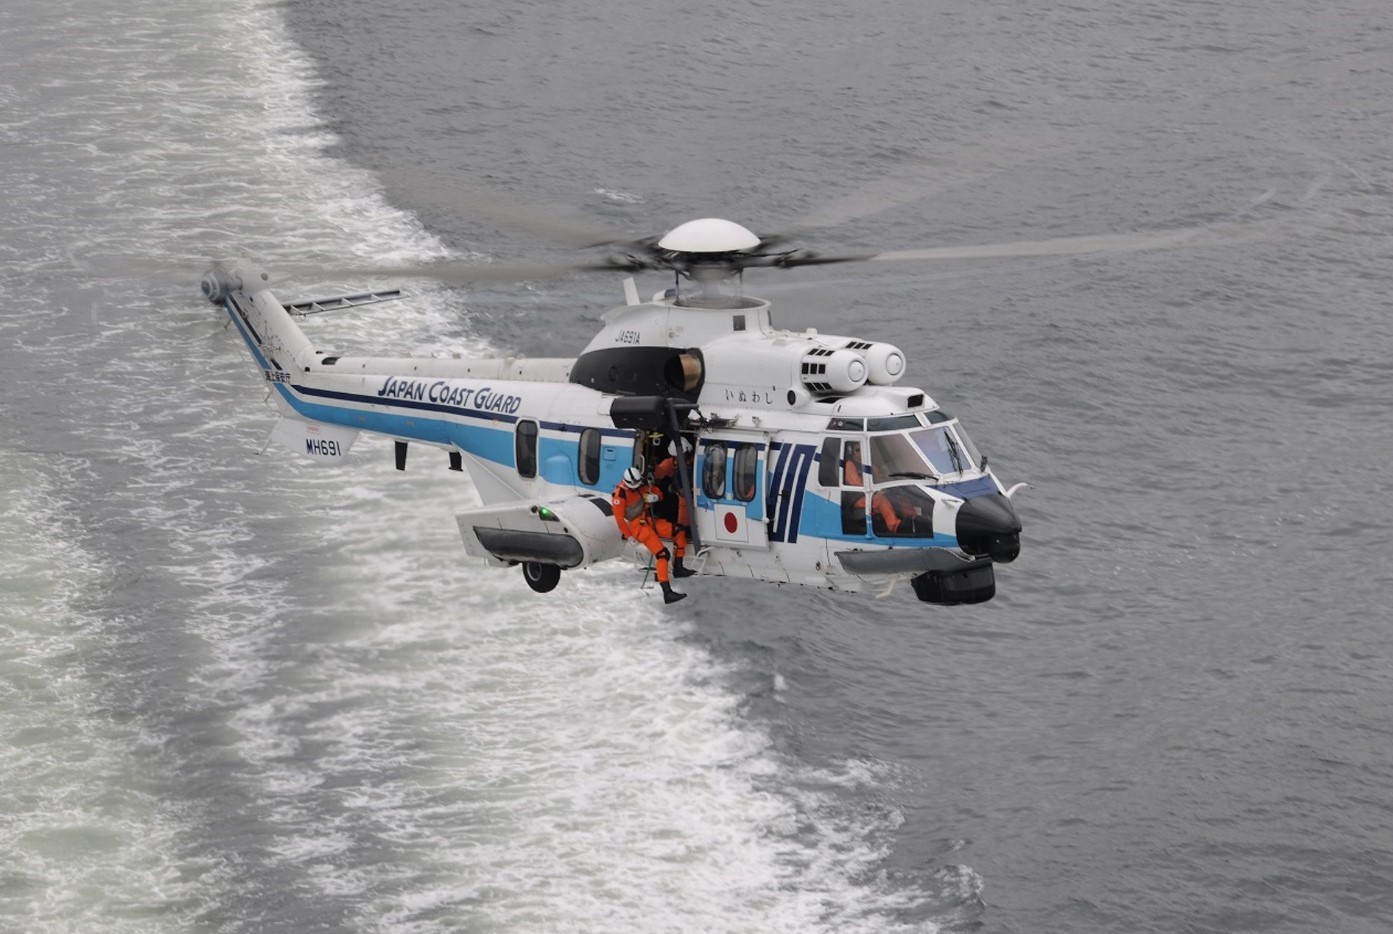 Japan Coast orders more Super Puma helicopters | Brief